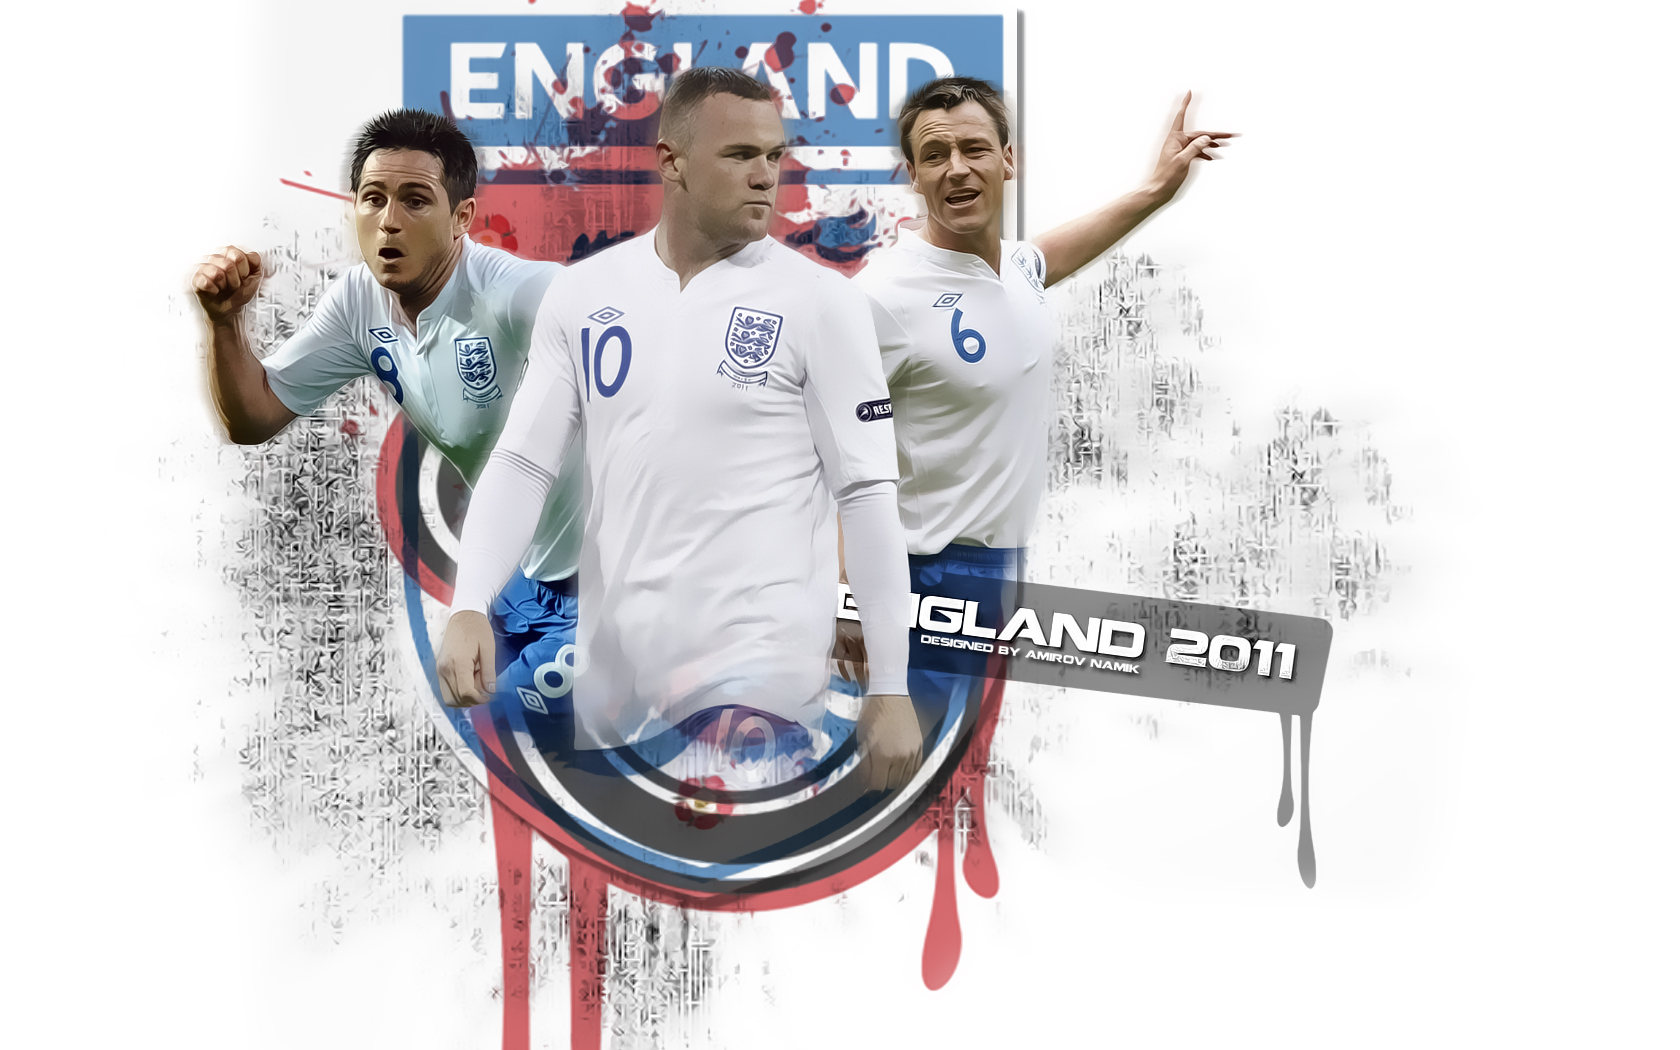 England National Football Team Picture by Namik Amirov